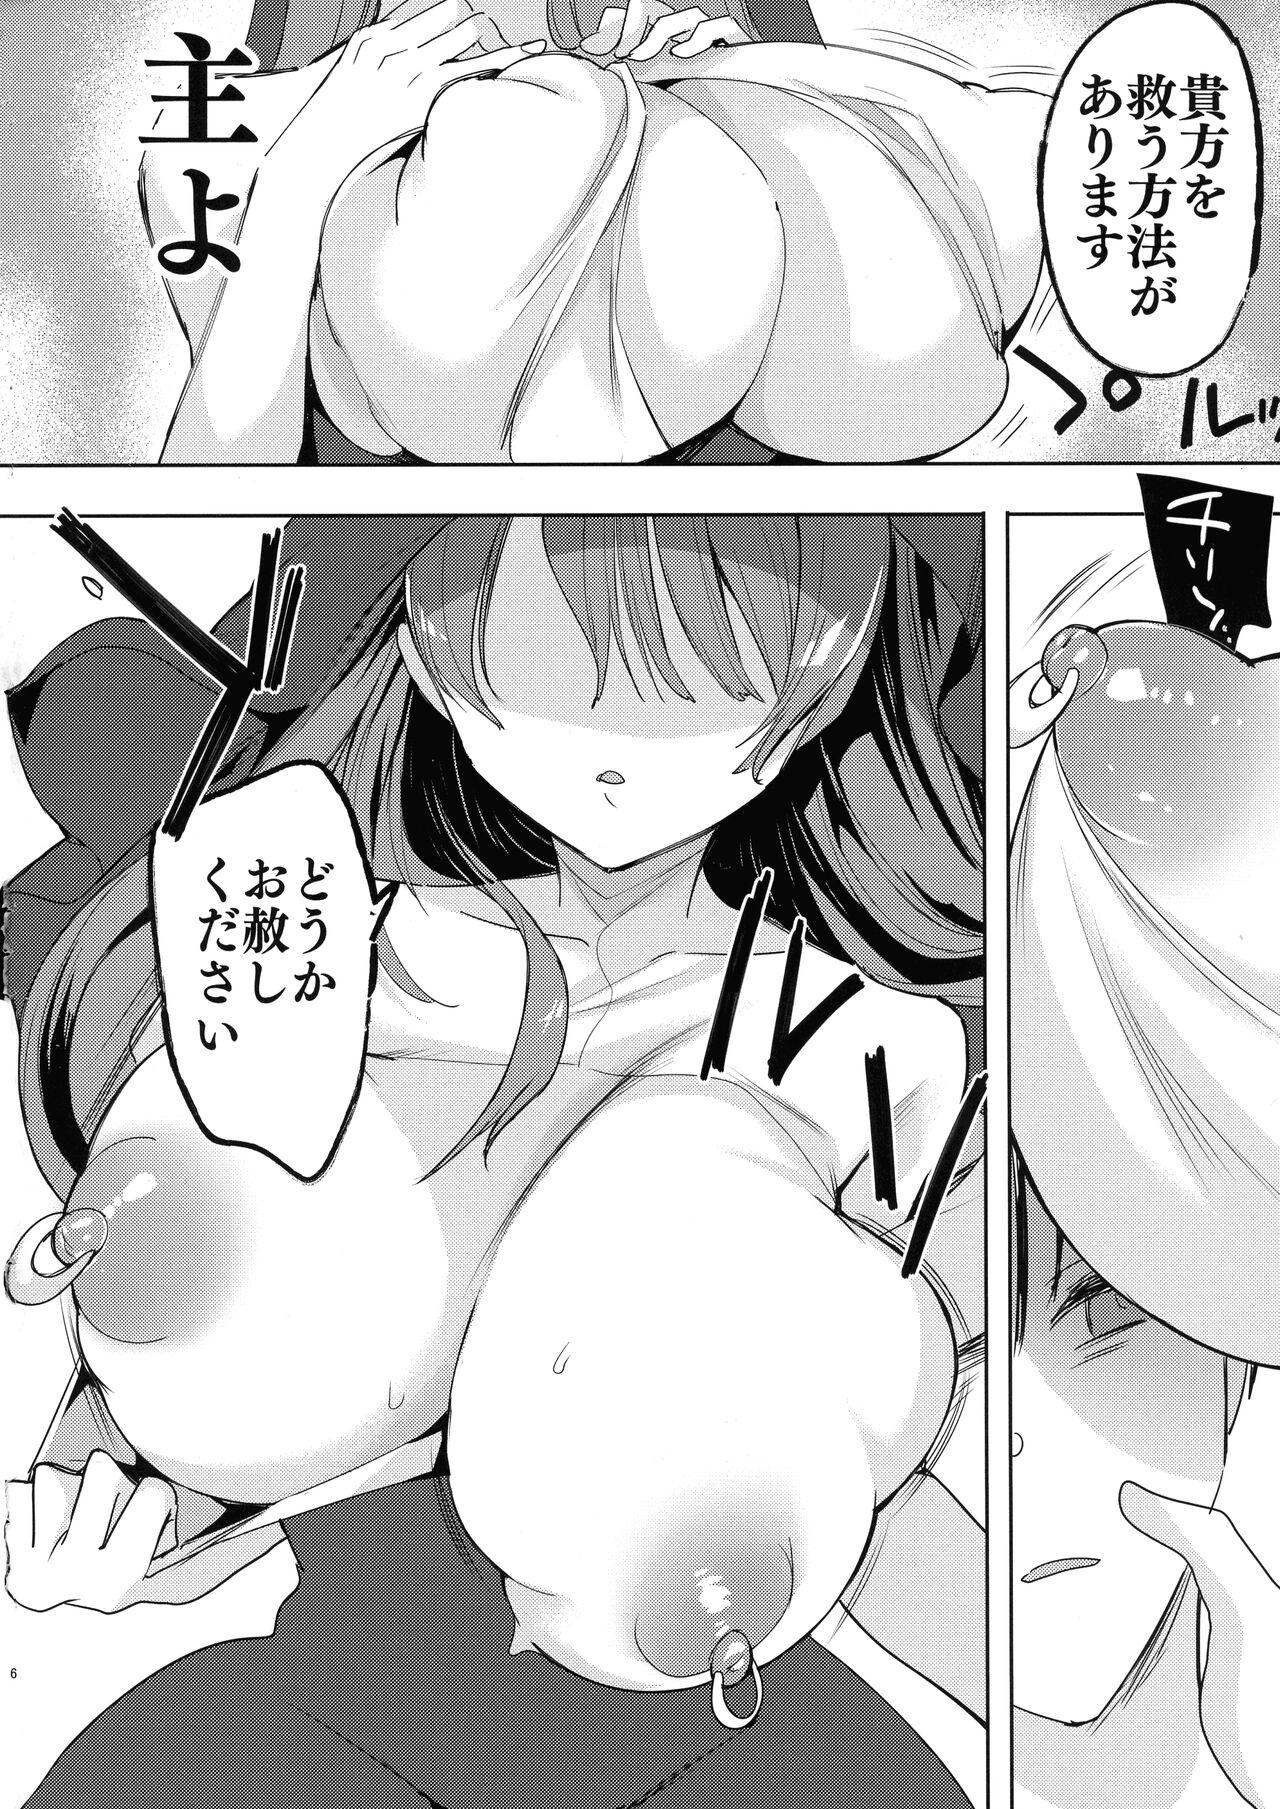 Gemendo Isekai de Bonyuu Sommelier ni Natta Ore, Cheat Skill de Dakkoku Shimasu - I, who became a breast milk sommelier in another world, leaving the country with a cheat skill Livecams - Page 6